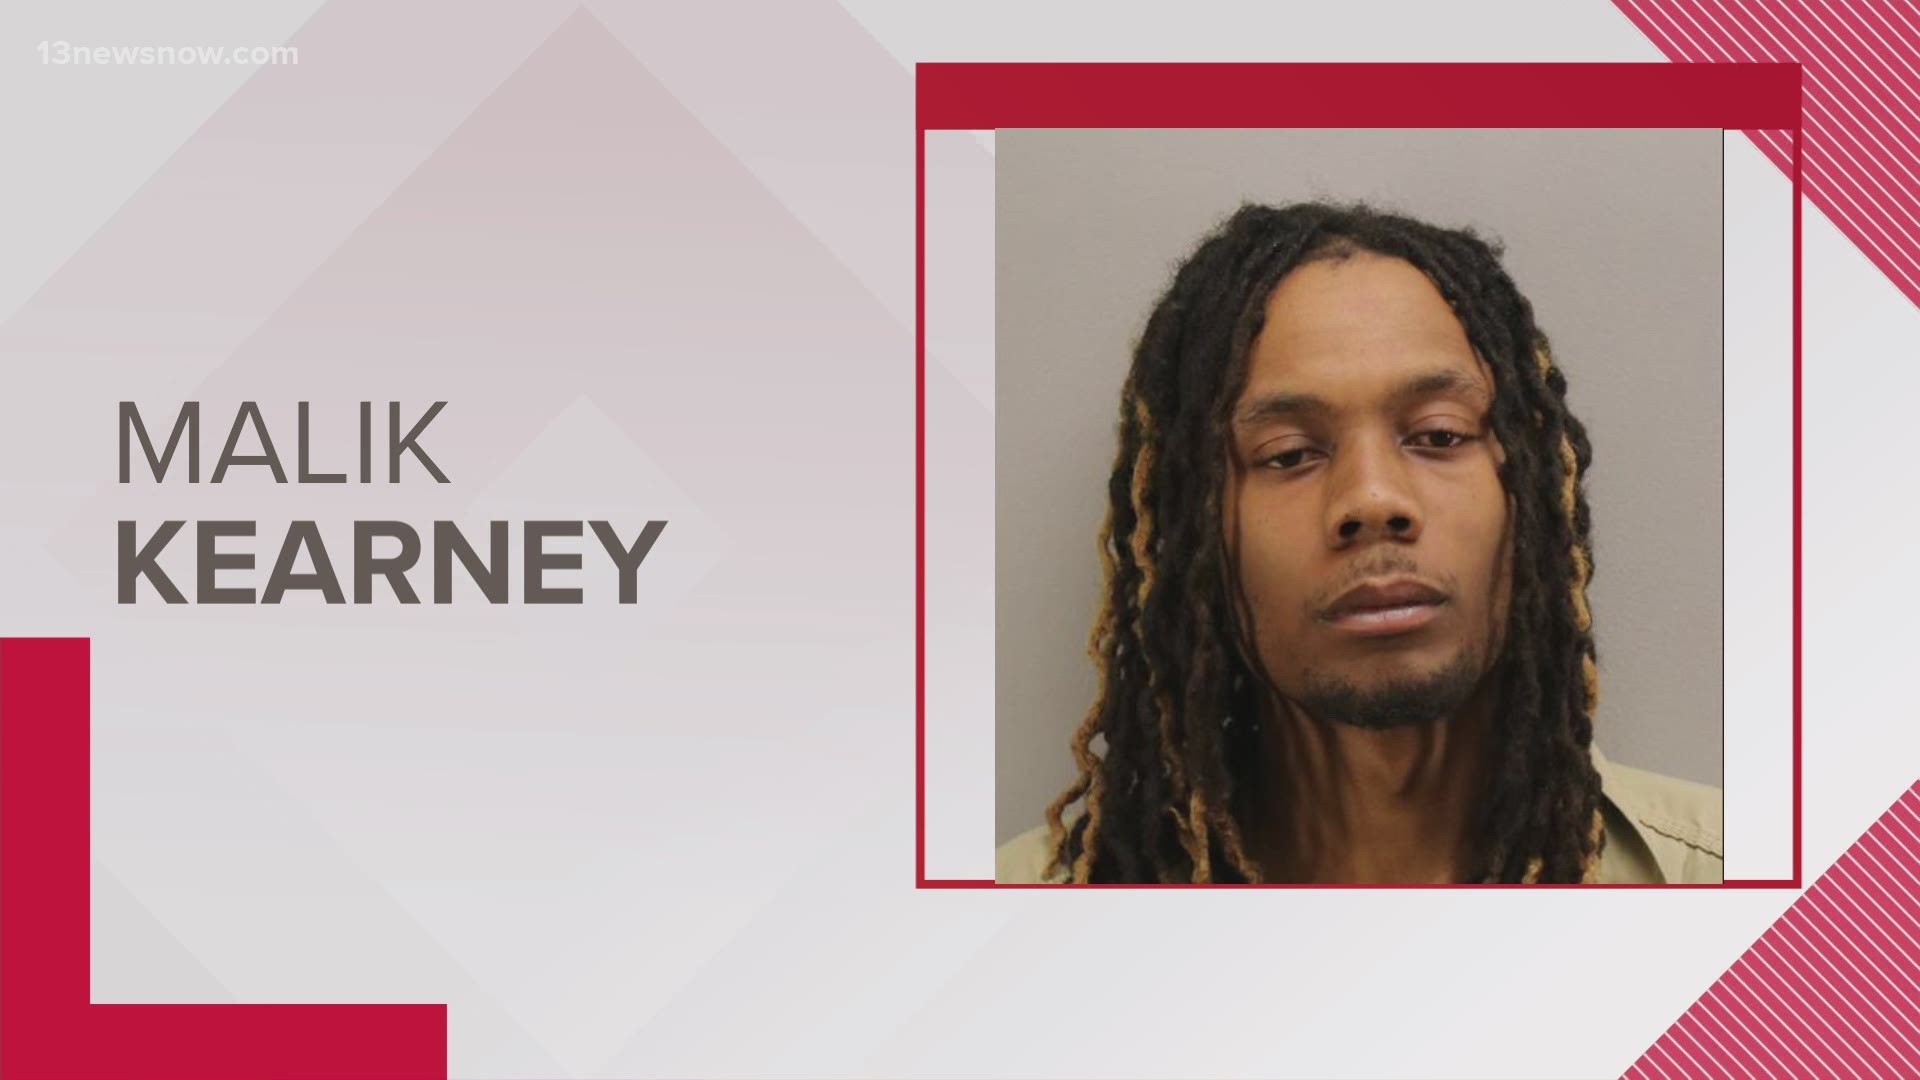 Police said Malik Kearney is accused of hitting an officer with his car at the Virginia Beach Oceanfront on March 26, 2021.